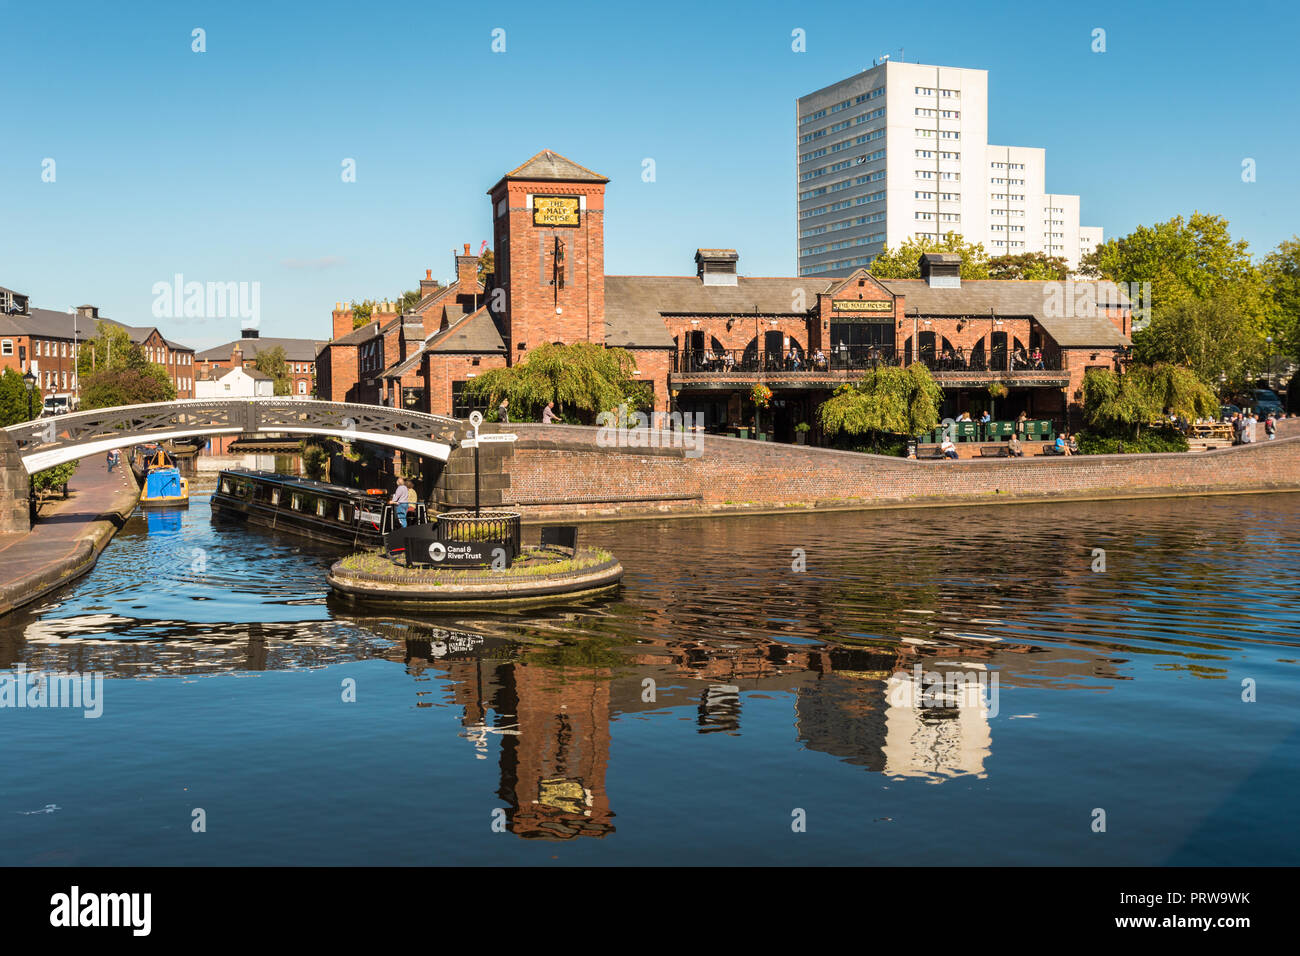 The Malthouse pub and restaurant, Brindley Place, and canal, Birmingham UK Stock Photo